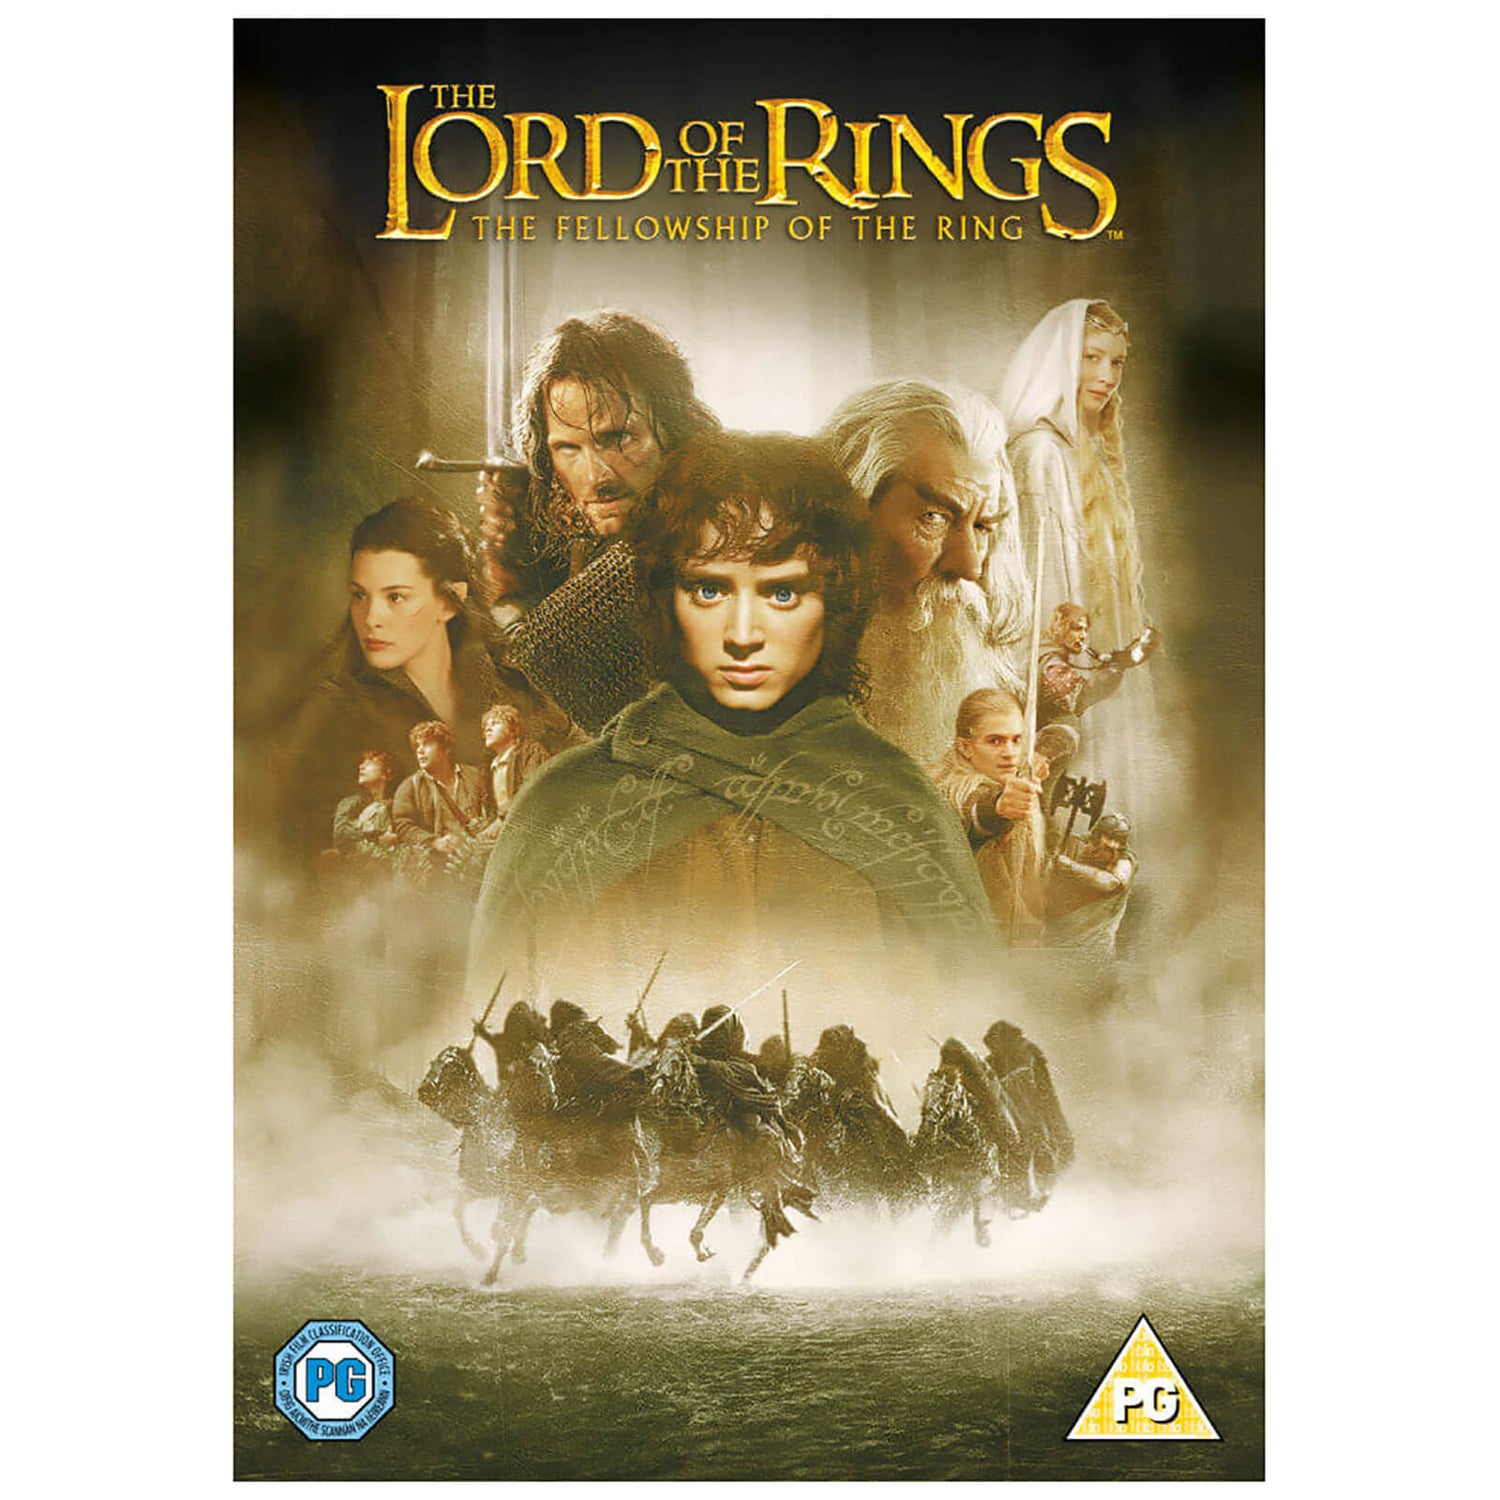 Lord of the Rings: Fellowship of the Ring